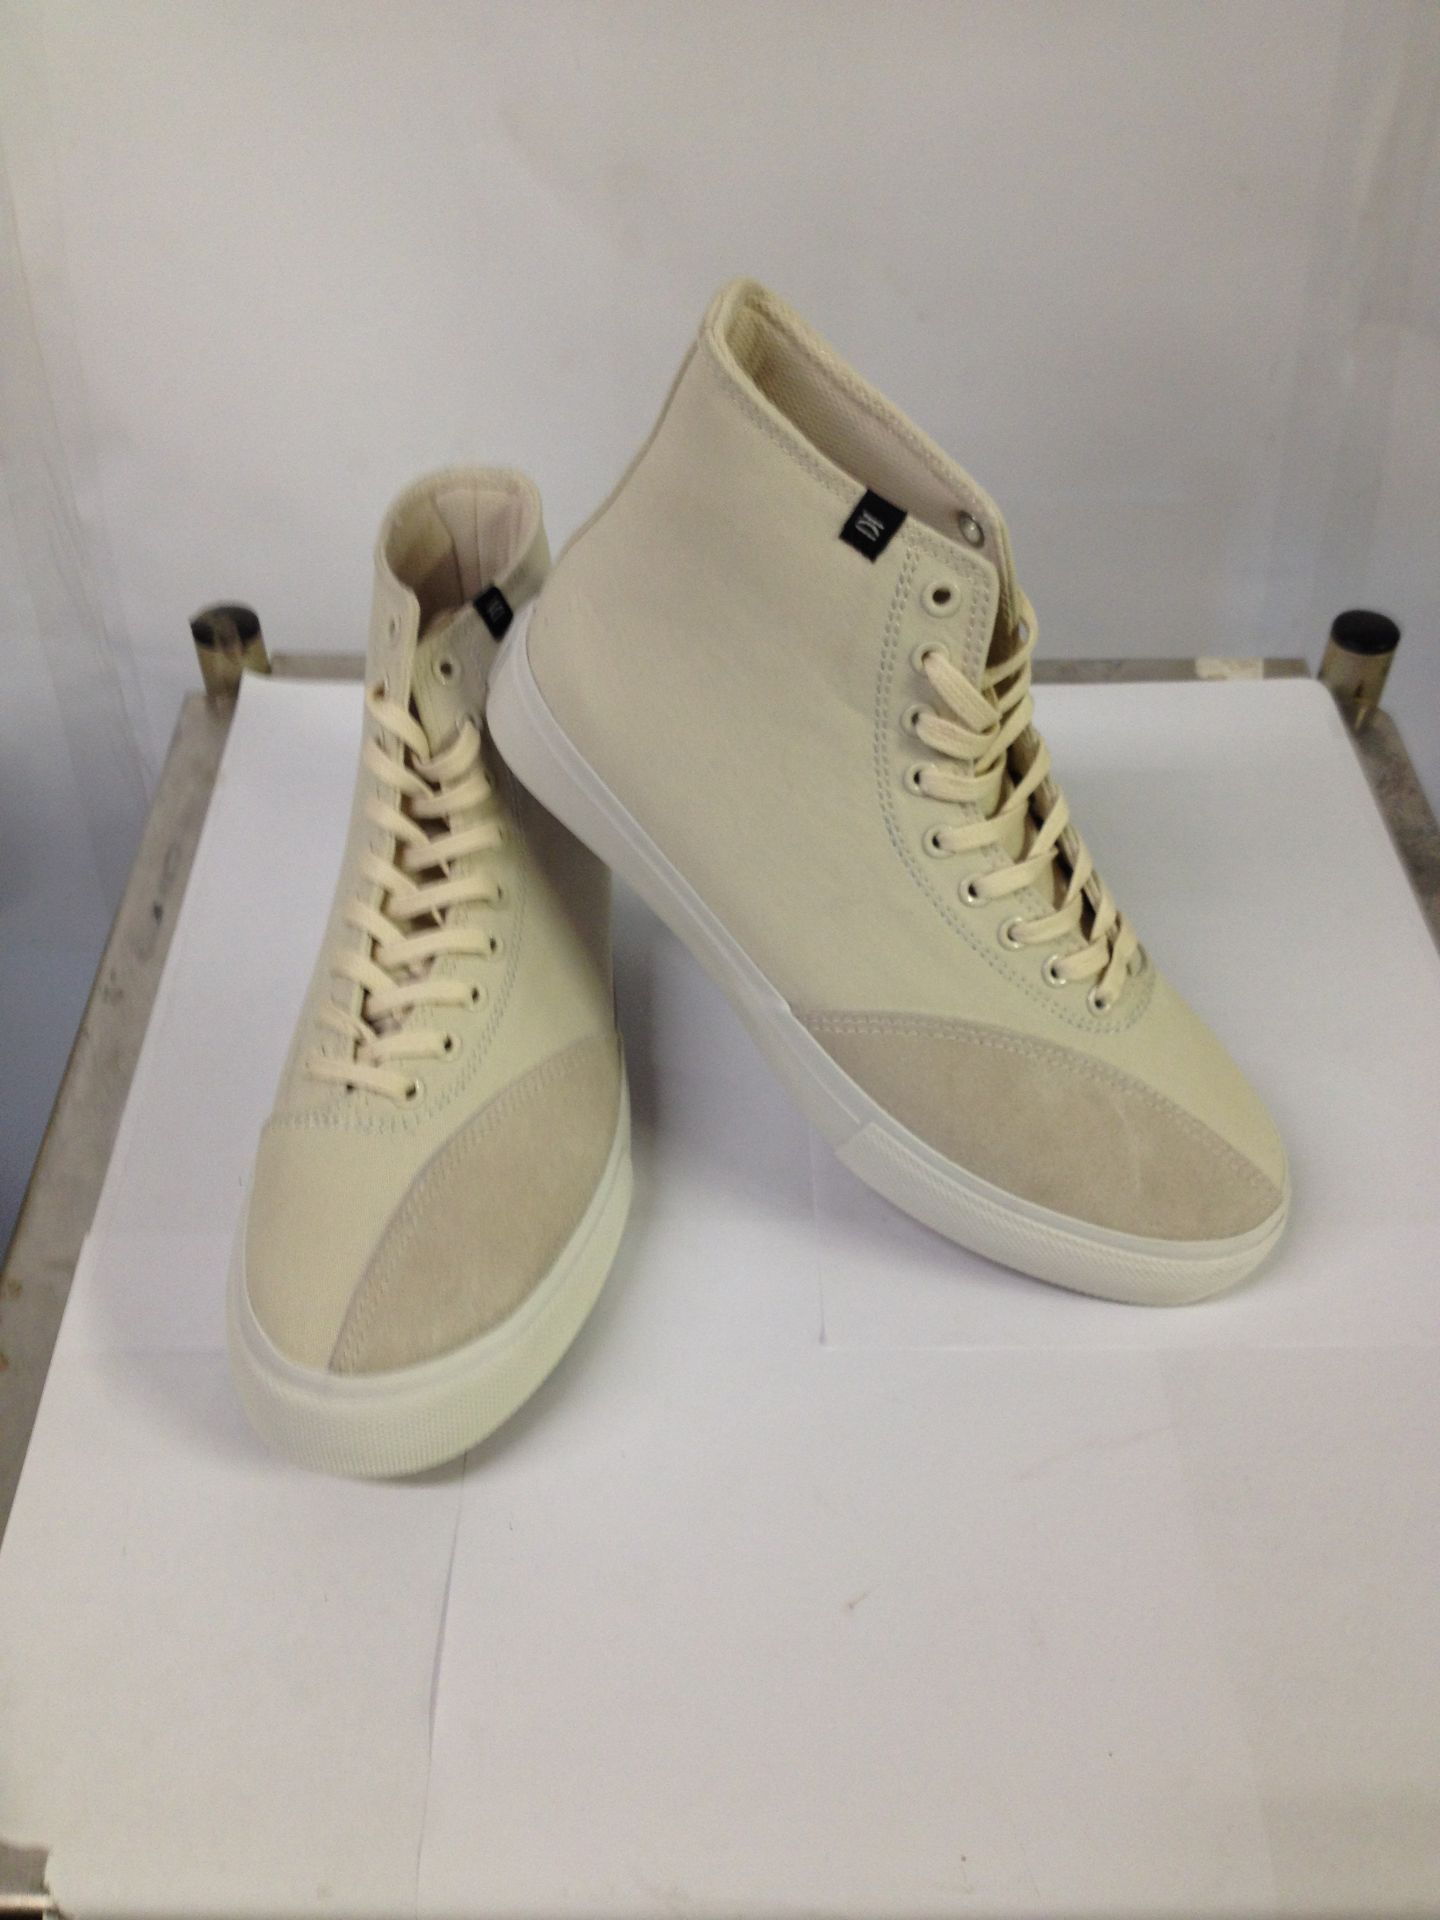 1 x Dodds High Top Sneakers | Colour: Winter White | UK Size: 6 | Unisex | RRP £ 55